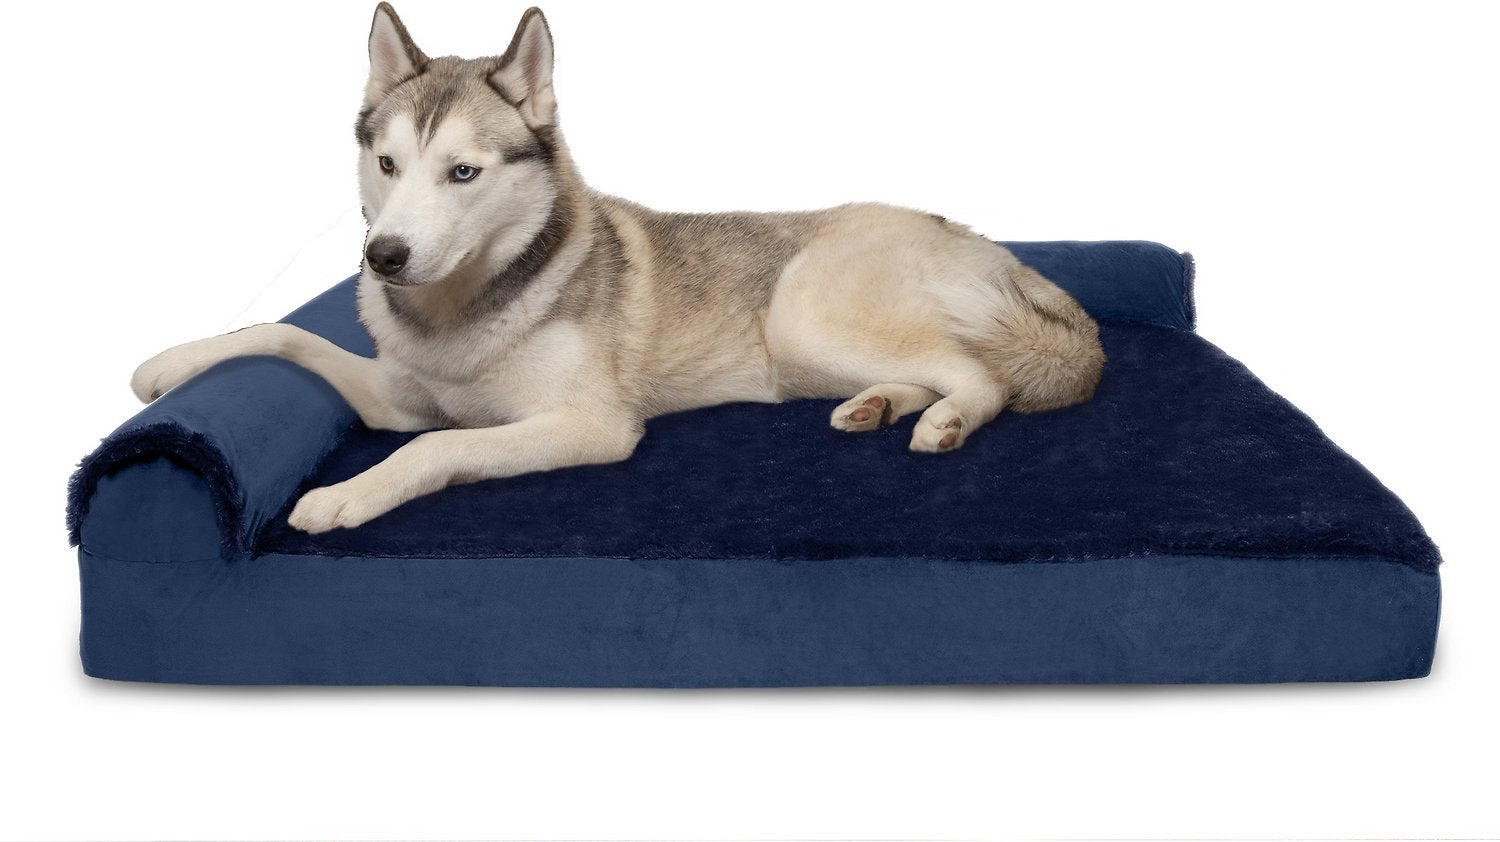 Canine's World Orthopedic Dog Beds FurHaven Plush & Velvet Deluxe Chaise Lounge Memory Top Sofa Pet Bed, FurHaven